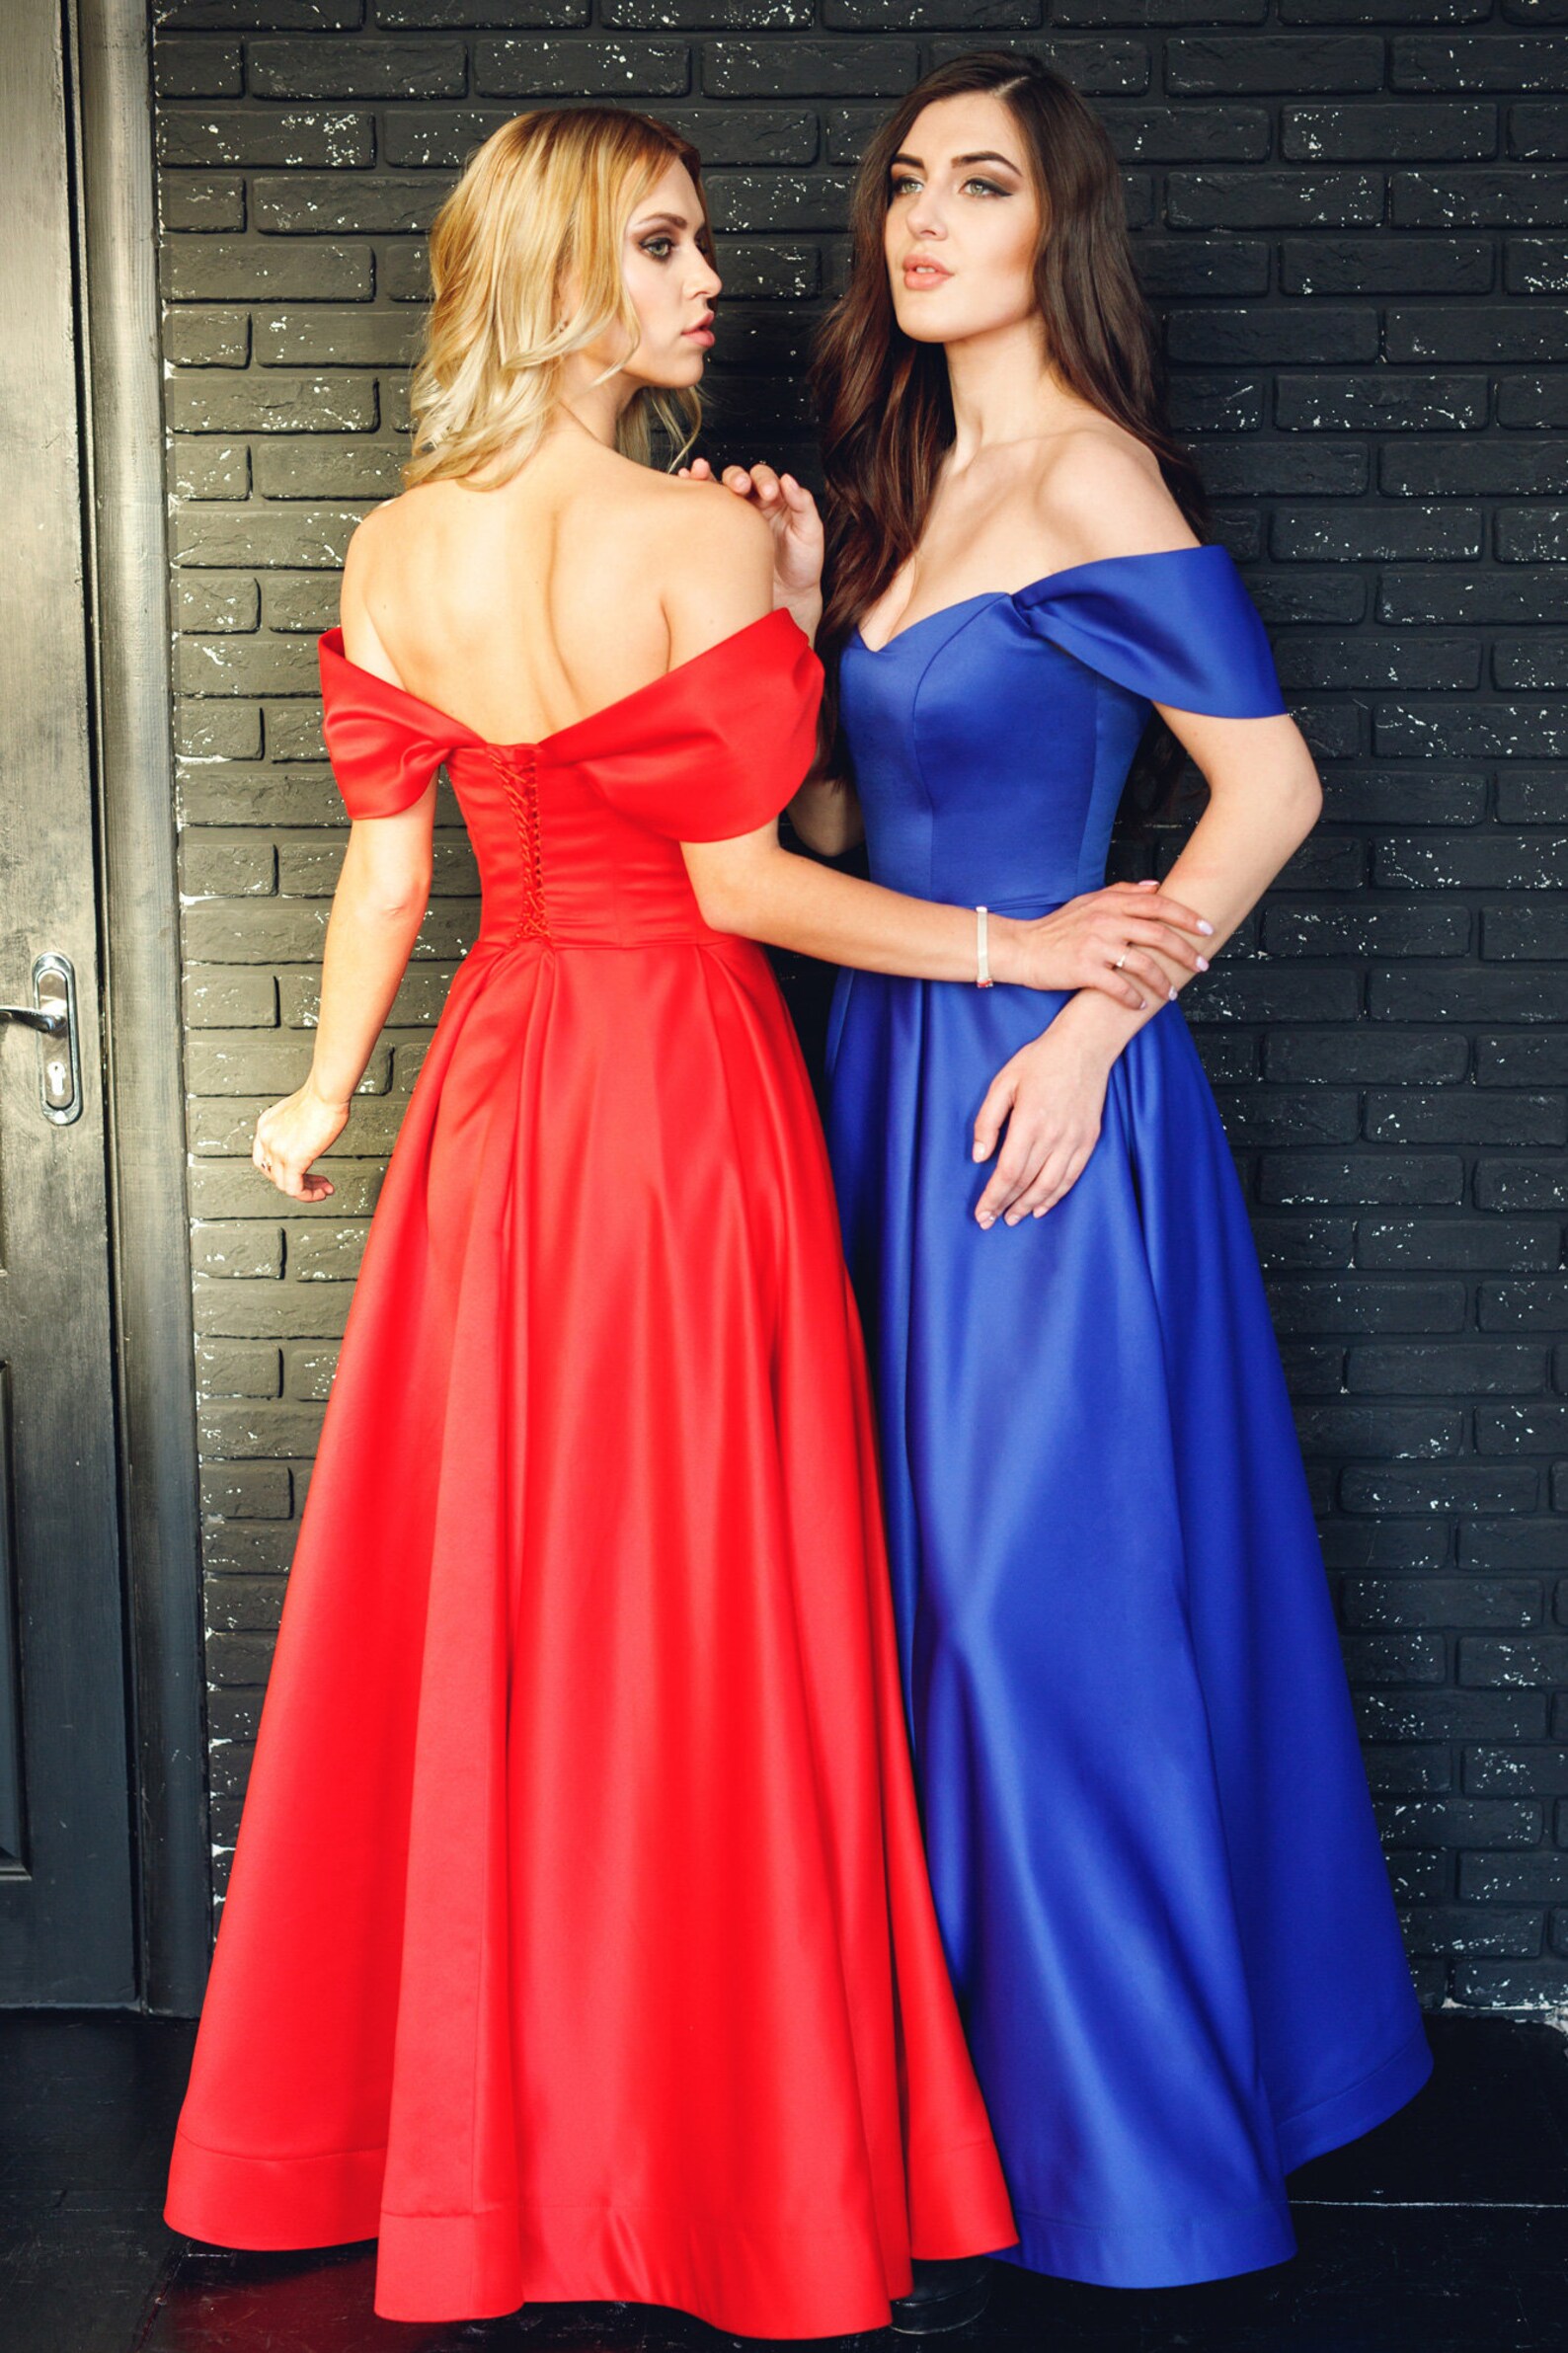 Elegant Off The Shoulder A Line Prom Dresses Satin Sexy High Split Floor Length Women Formal Occasion Party Gowns Plus Size Second Reception Evening Dress CL2570